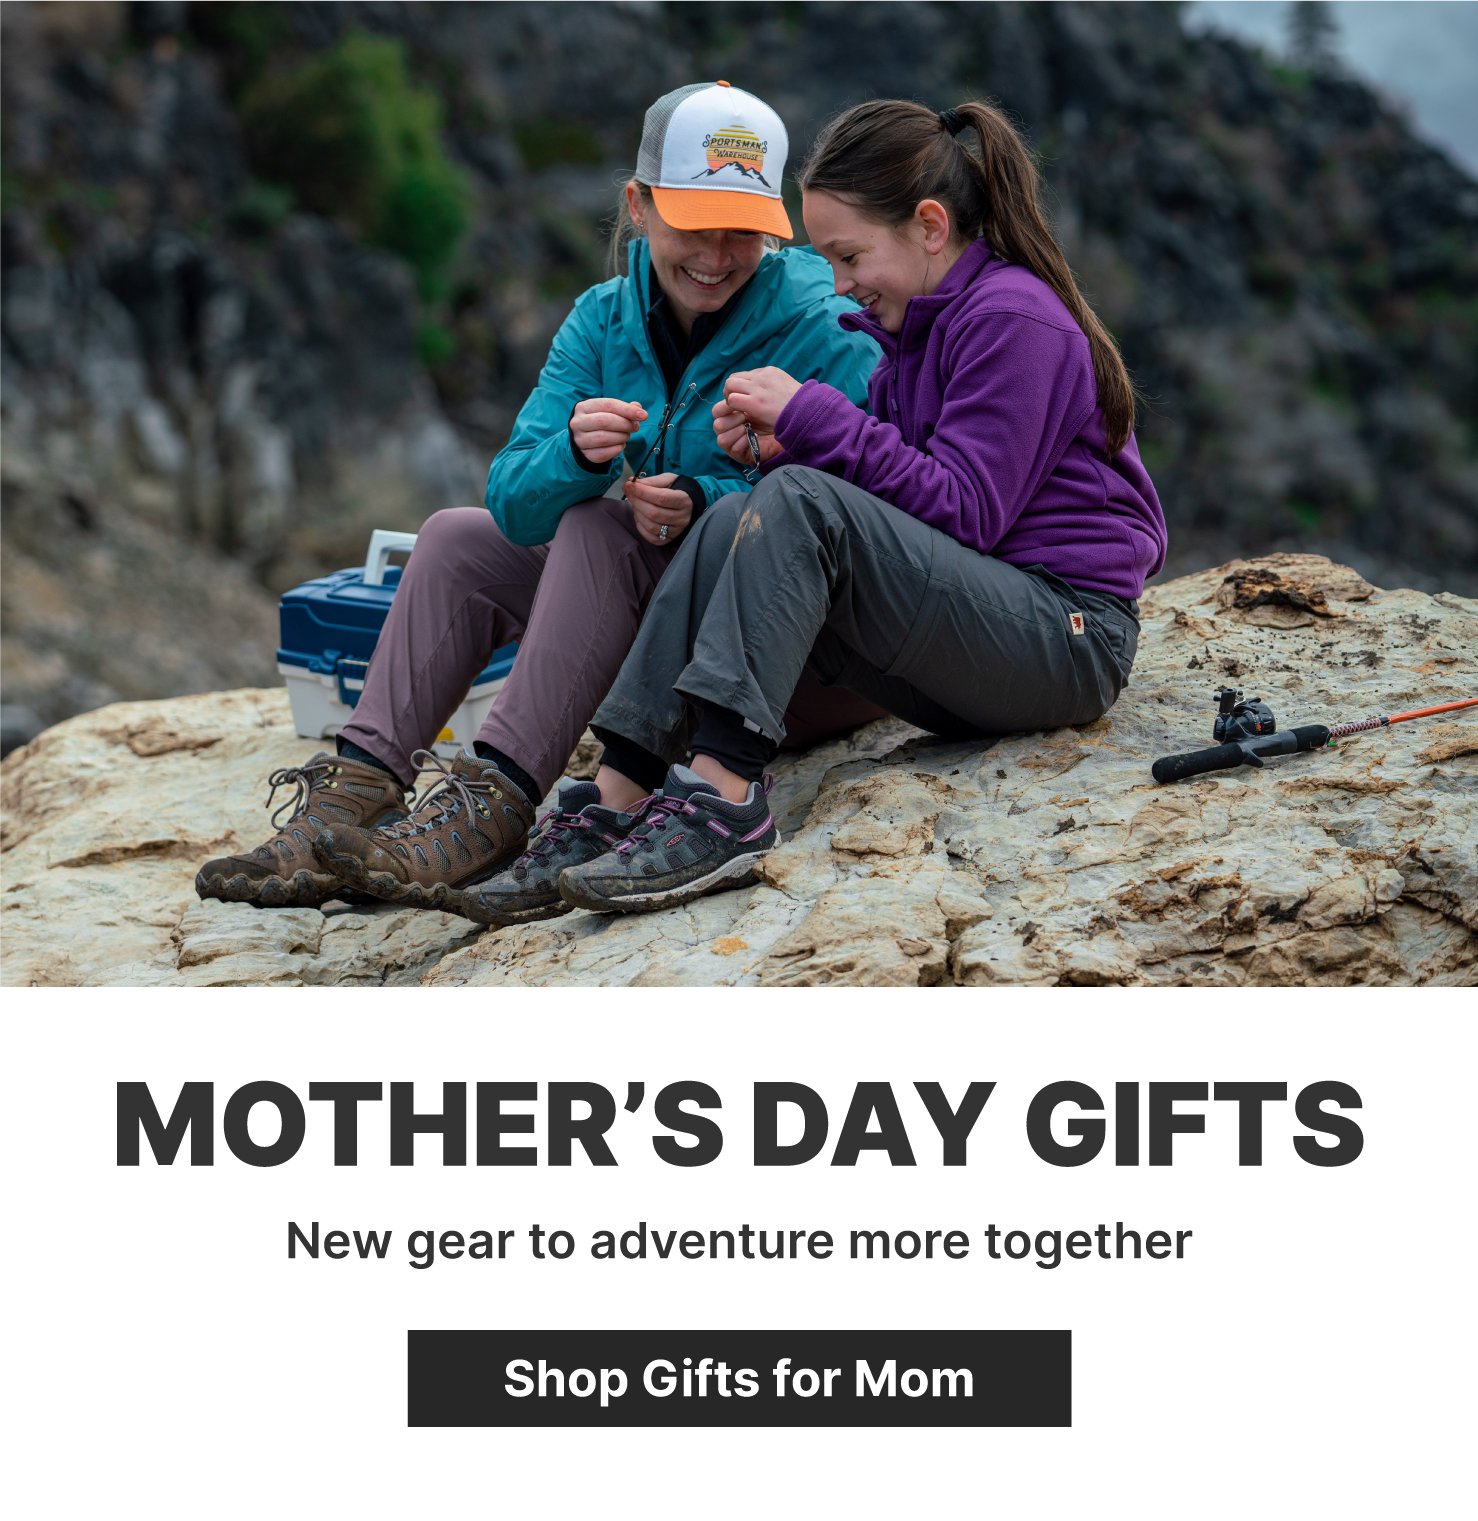 Mother's Day Gifts - New Gear To Adventure More Together